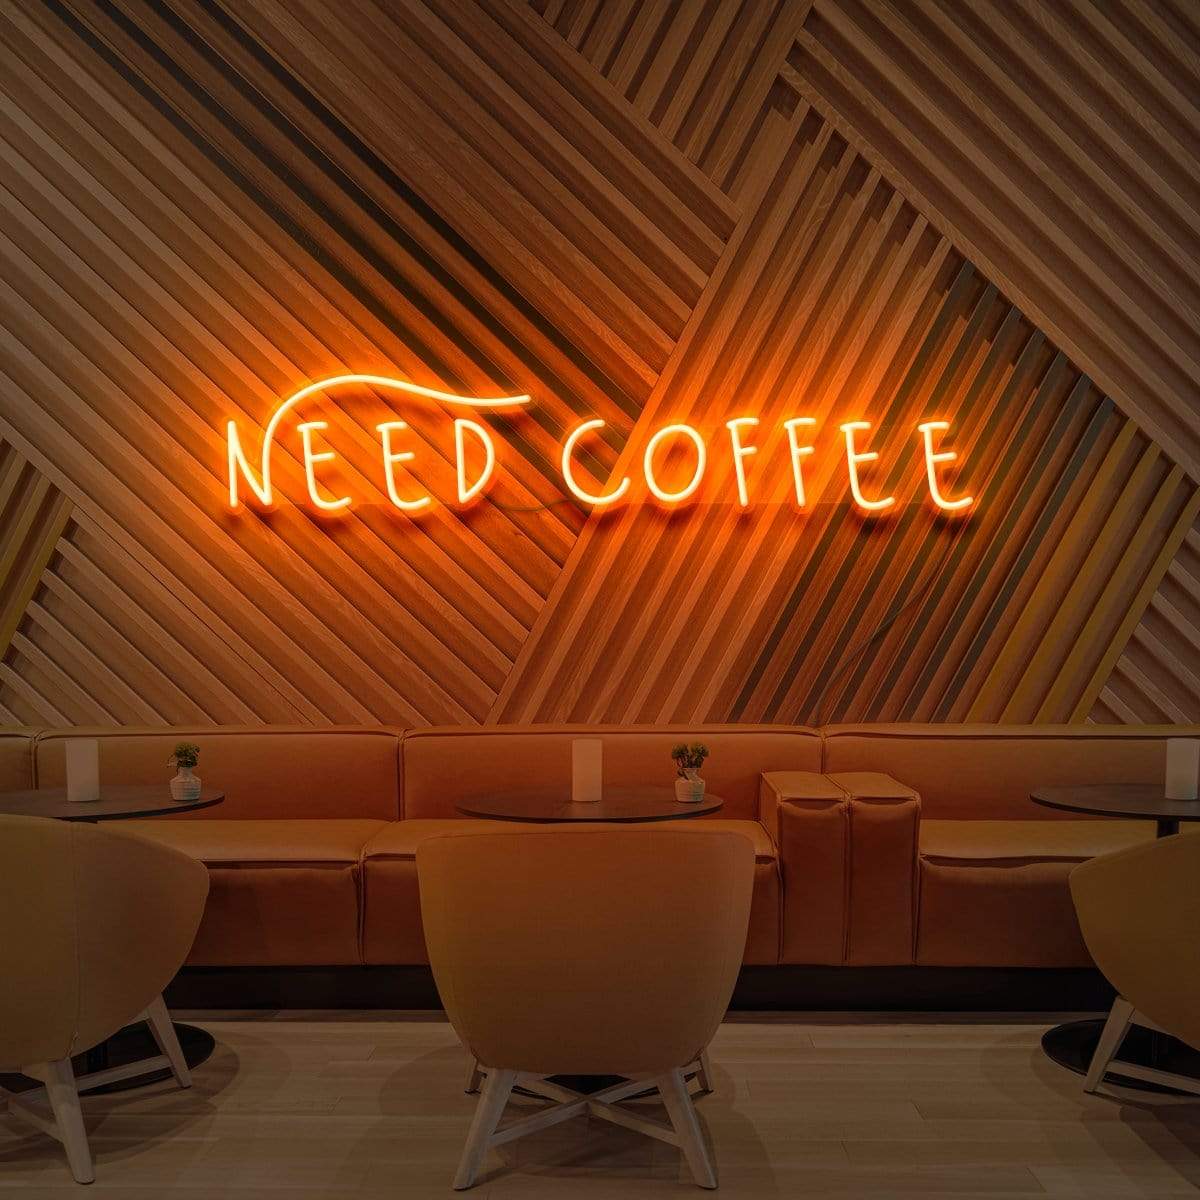 "Need Coffee" Neon Sign for Cafés 60cm (2ft) / Orange / LED Neon by Neon Icons